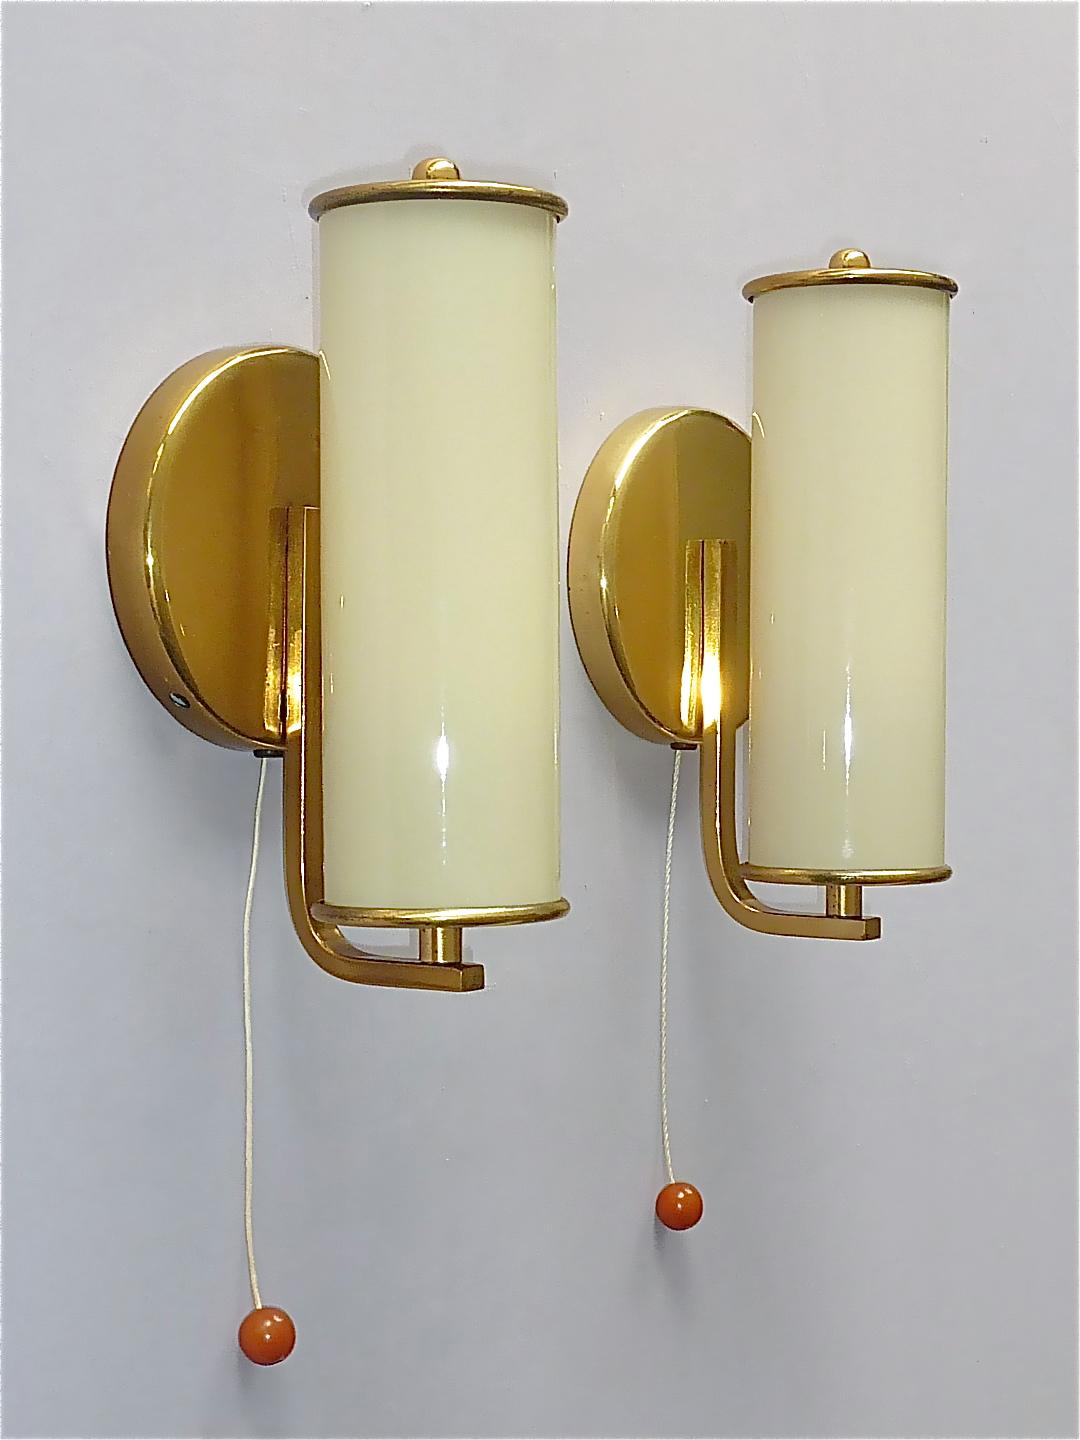 German Pair Modernist Bauhaus Sconces Tynell Style Brass Yellow Tube Glass Shades 1930s